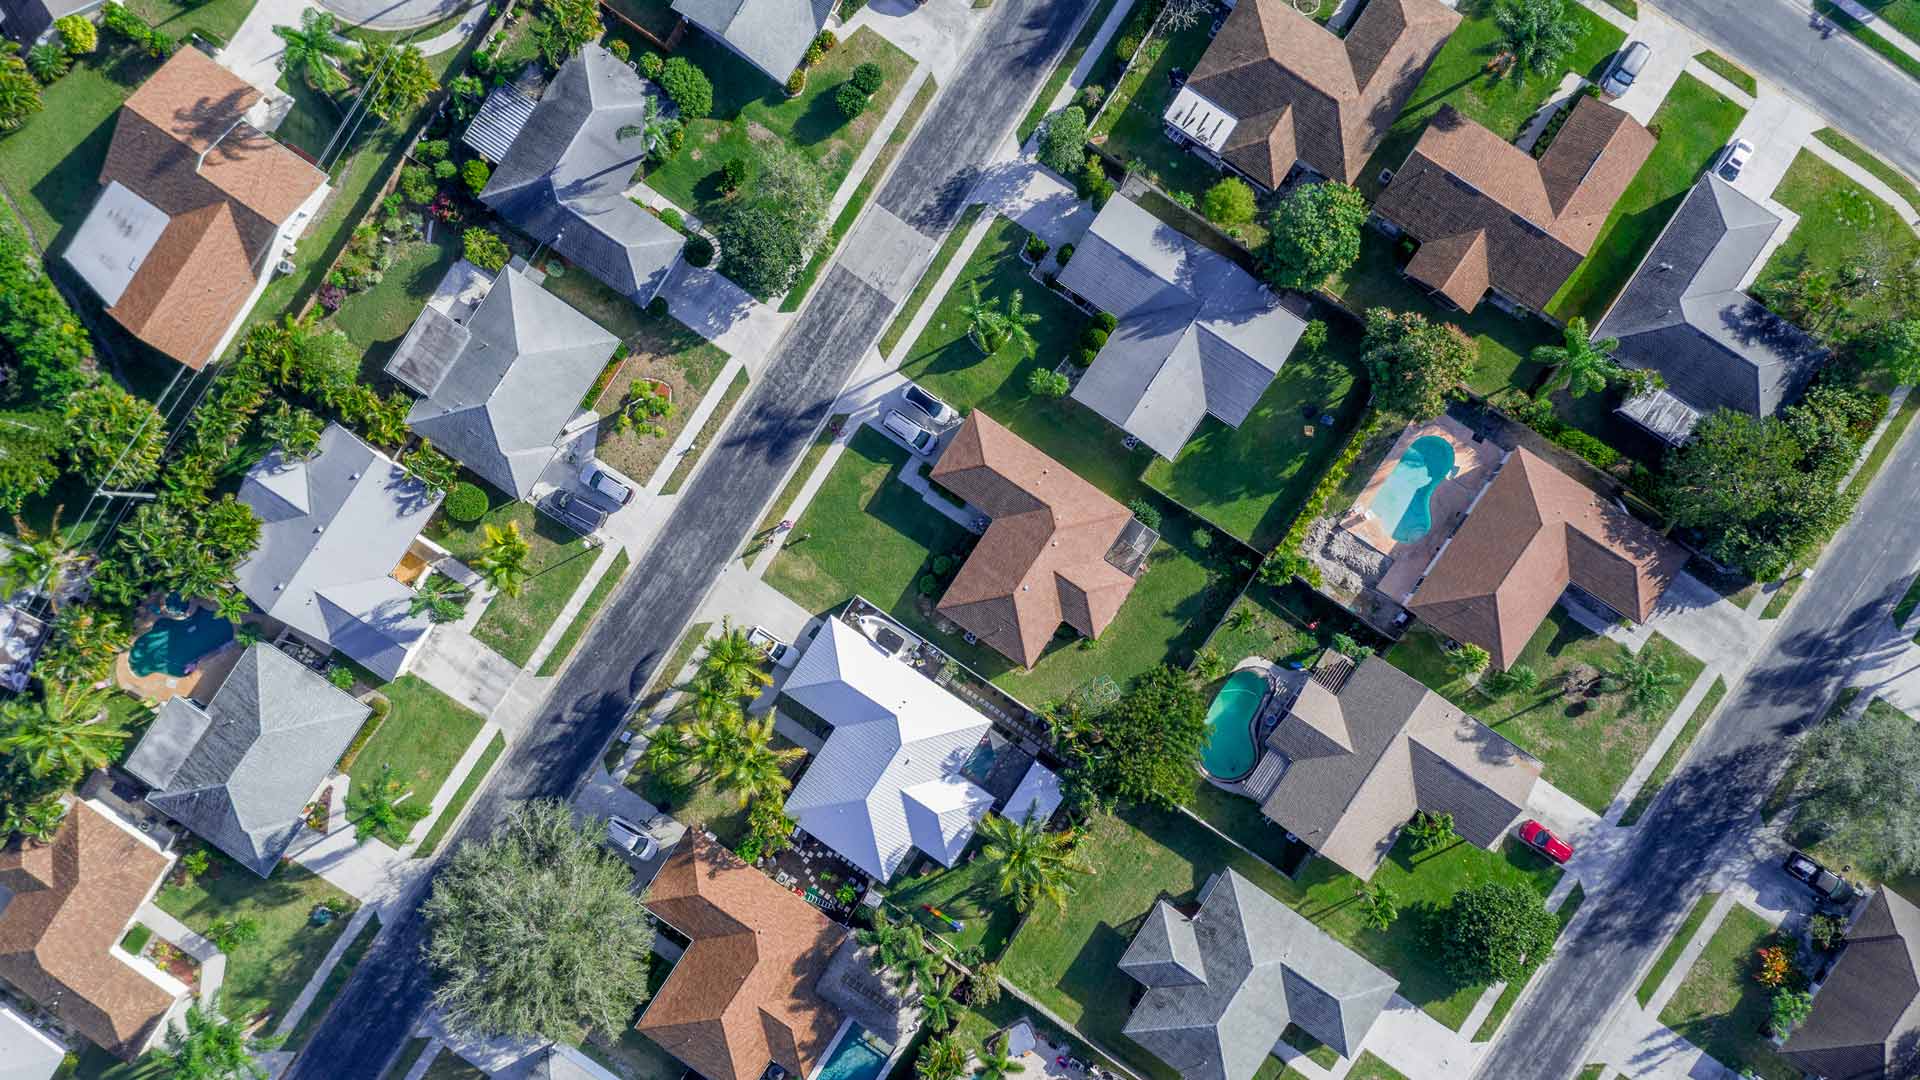 An aerial view of a tropical neighborhood in Gibsonton, FL.